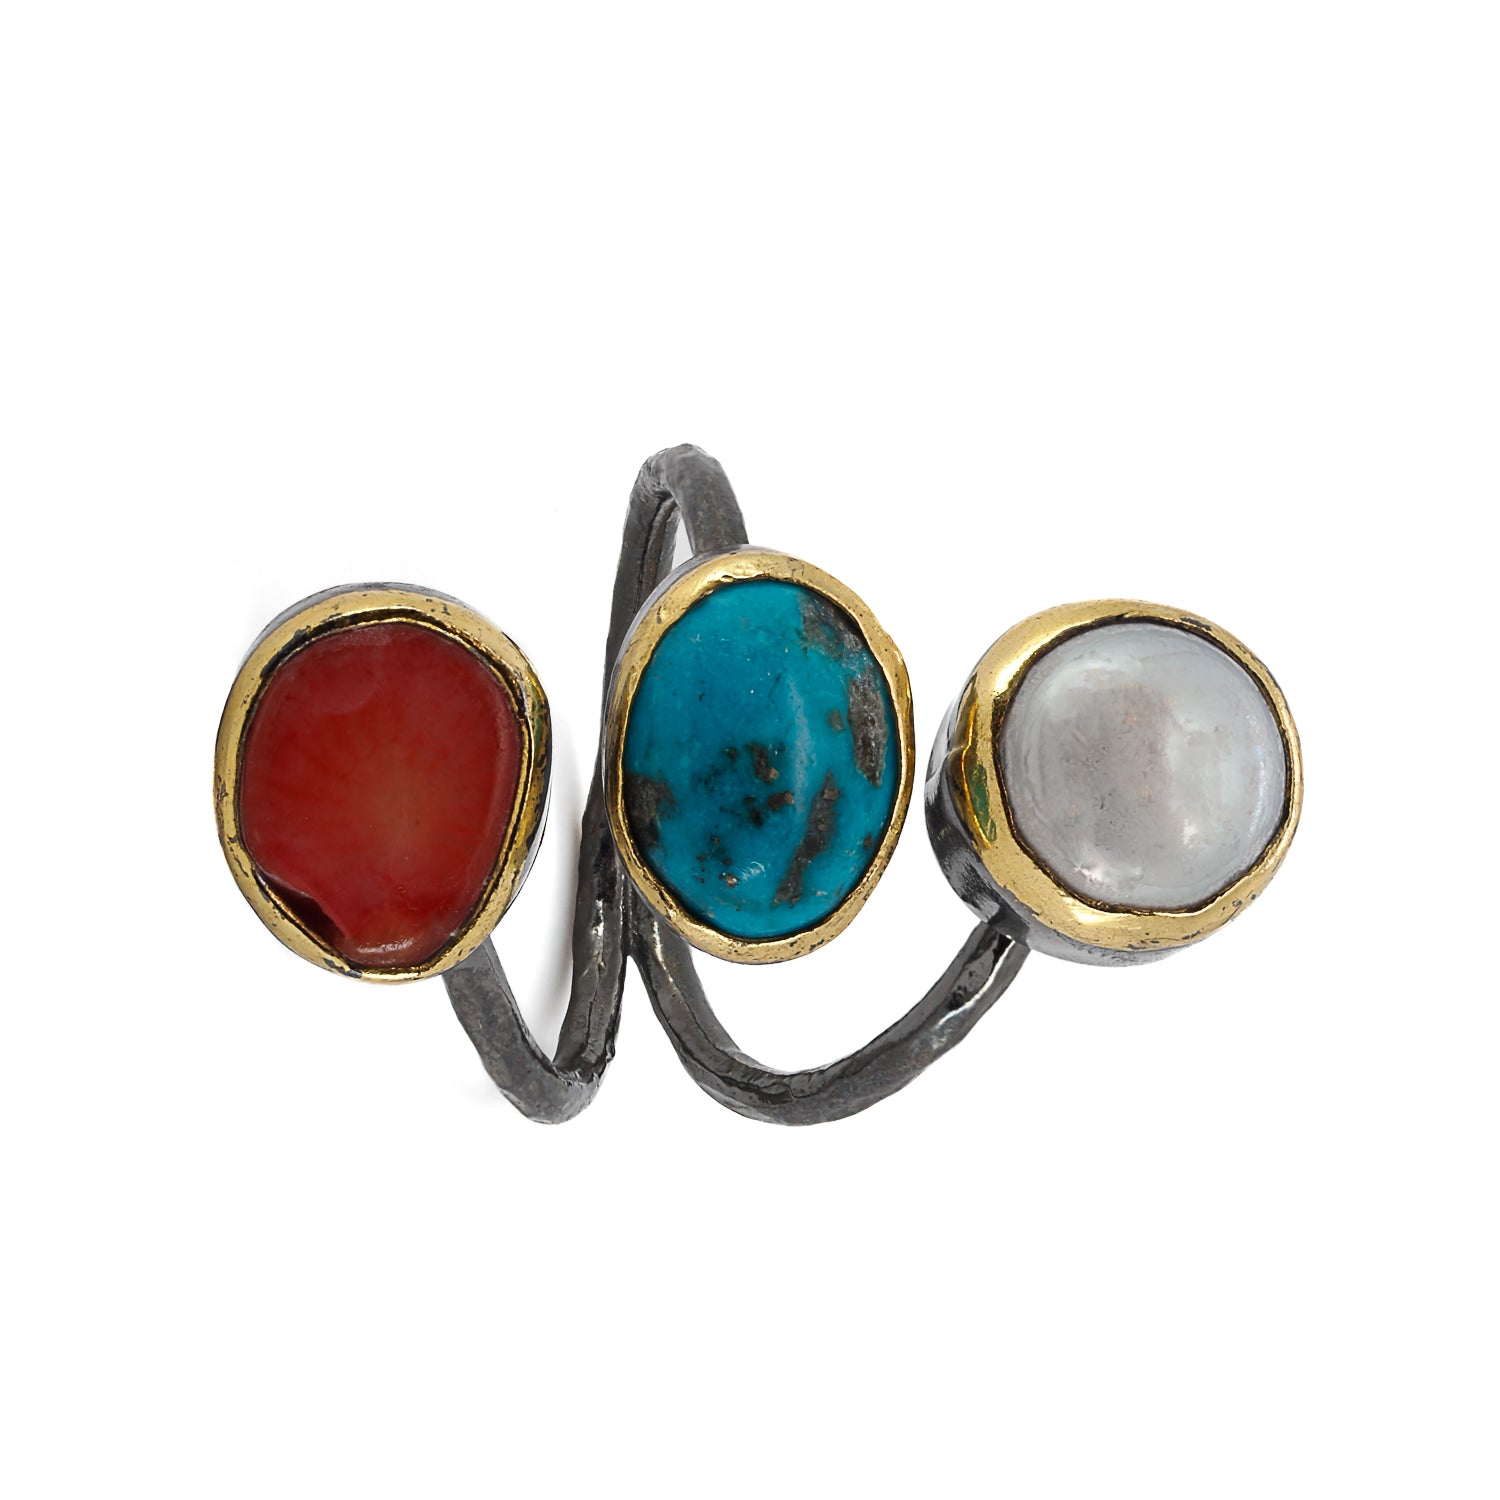 Elevate your style with the vibrant colors of the Triple Gemstone Sterling Silver Ring.